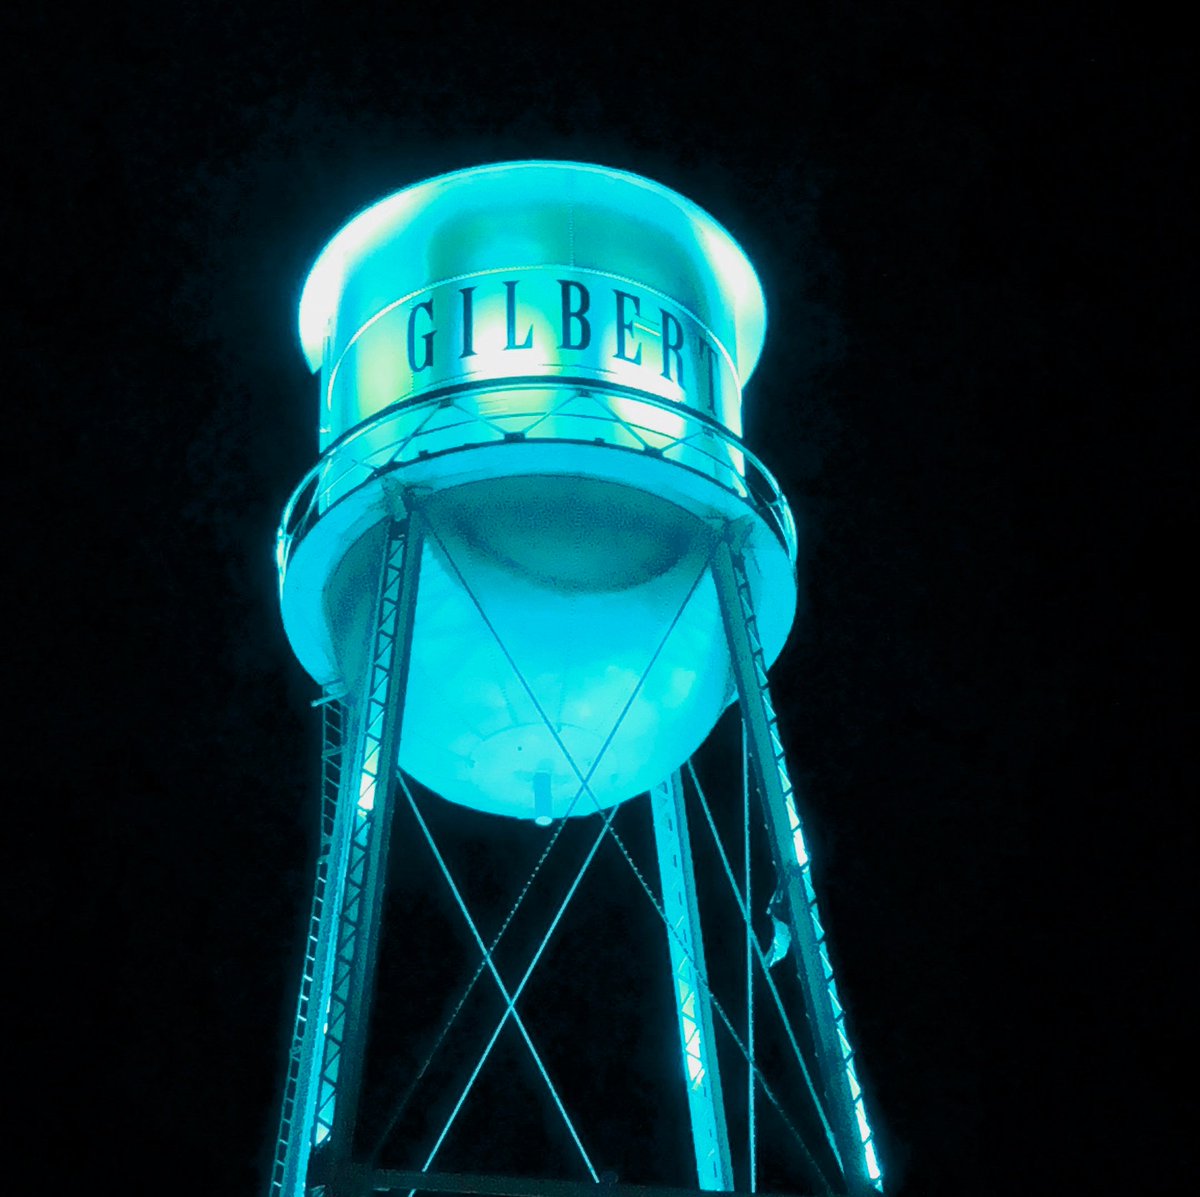 The Gilbert water tower at night, illuminated in teal